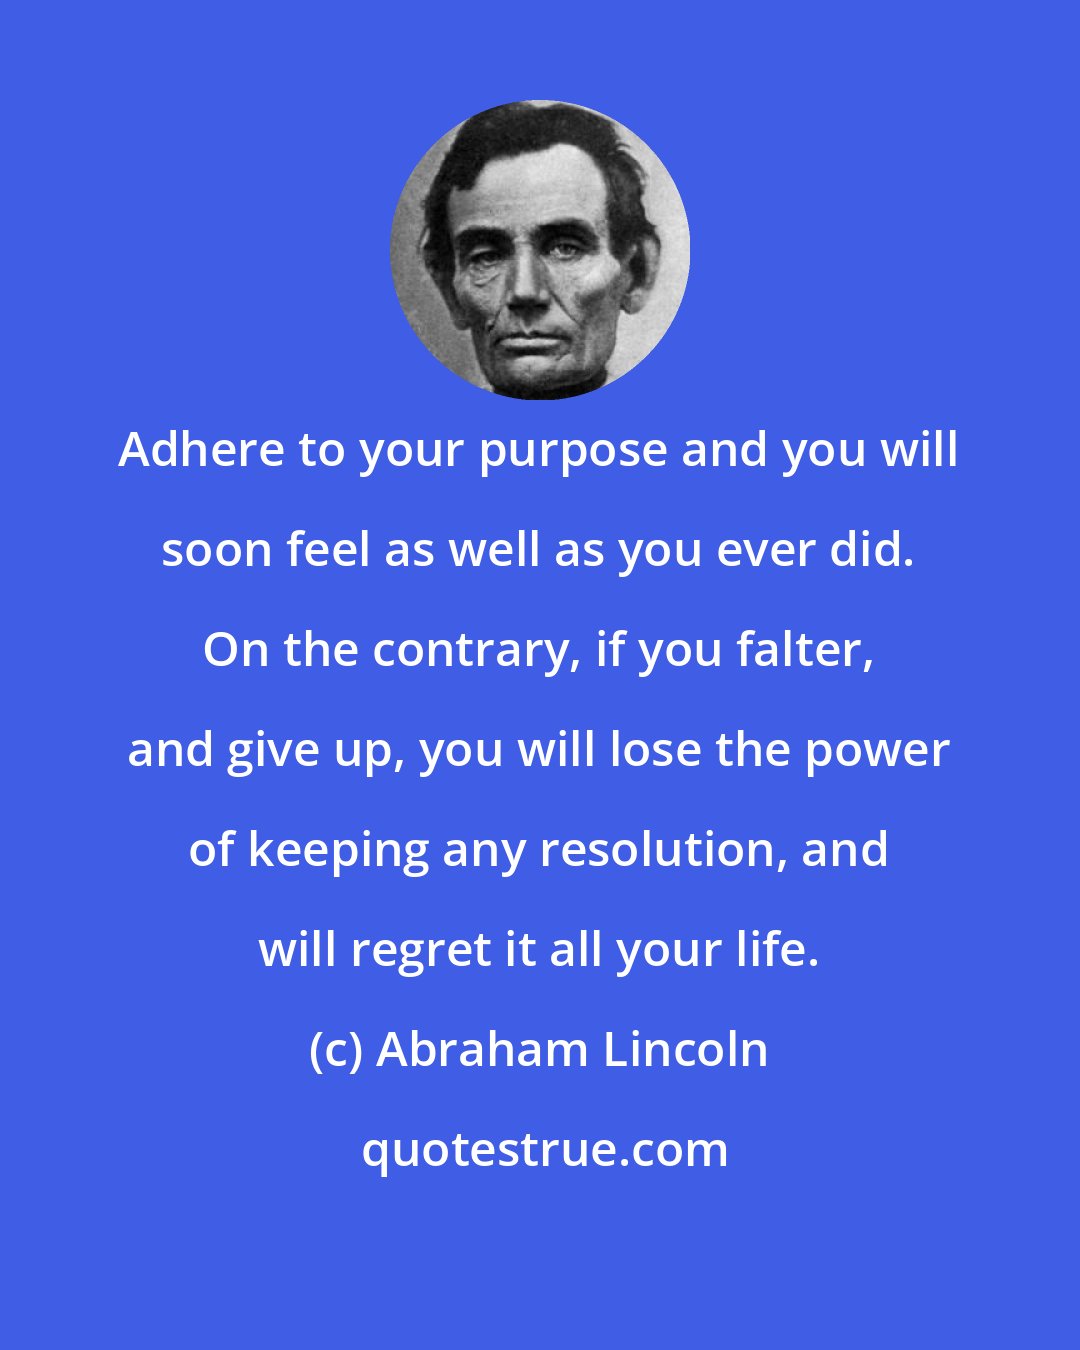 Abraham Lincoln: Adhere to your purpose and you will soon feel as well as you ever did. On the contrary, if you falter, and give up, you will lose the power of keeping any resolution, and will regret it all your life.